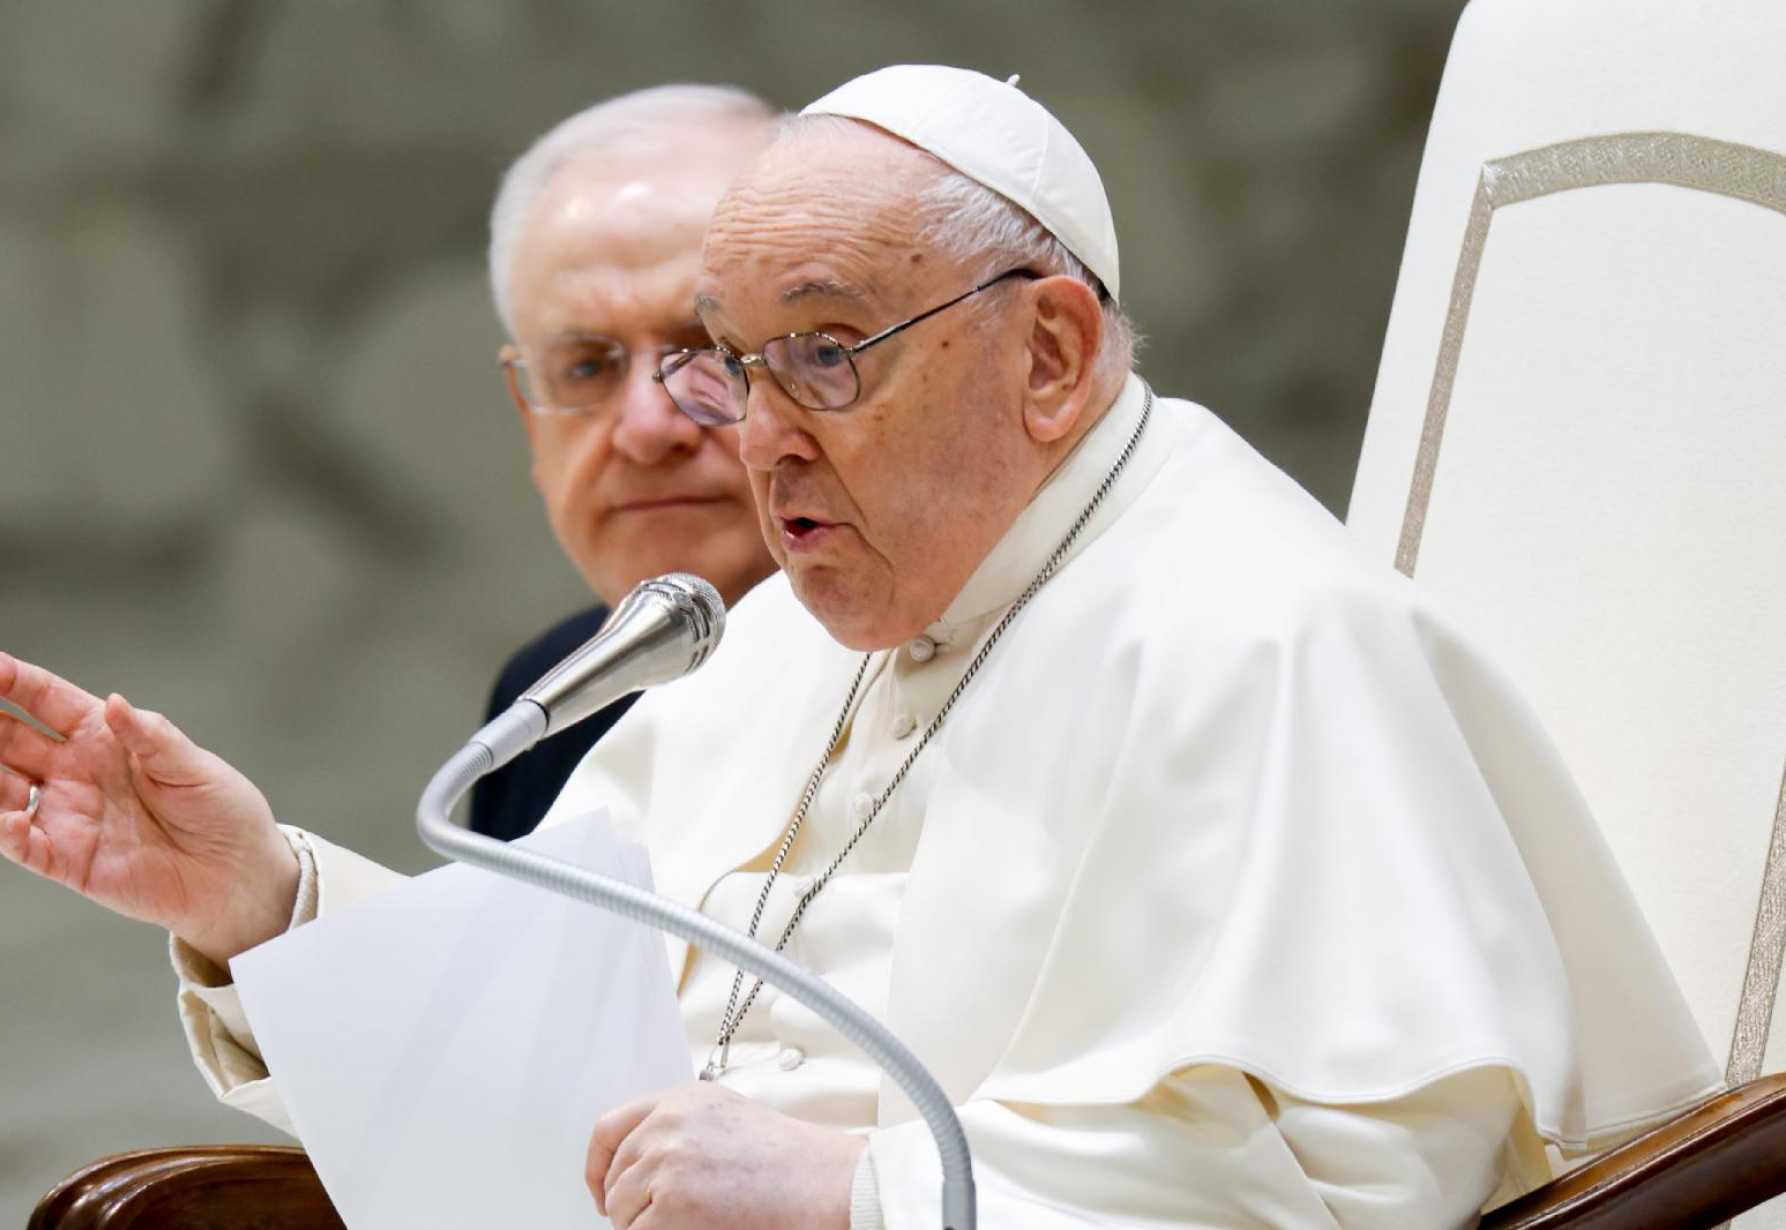 Wrath destroys relationships, pins blame on others, pope says